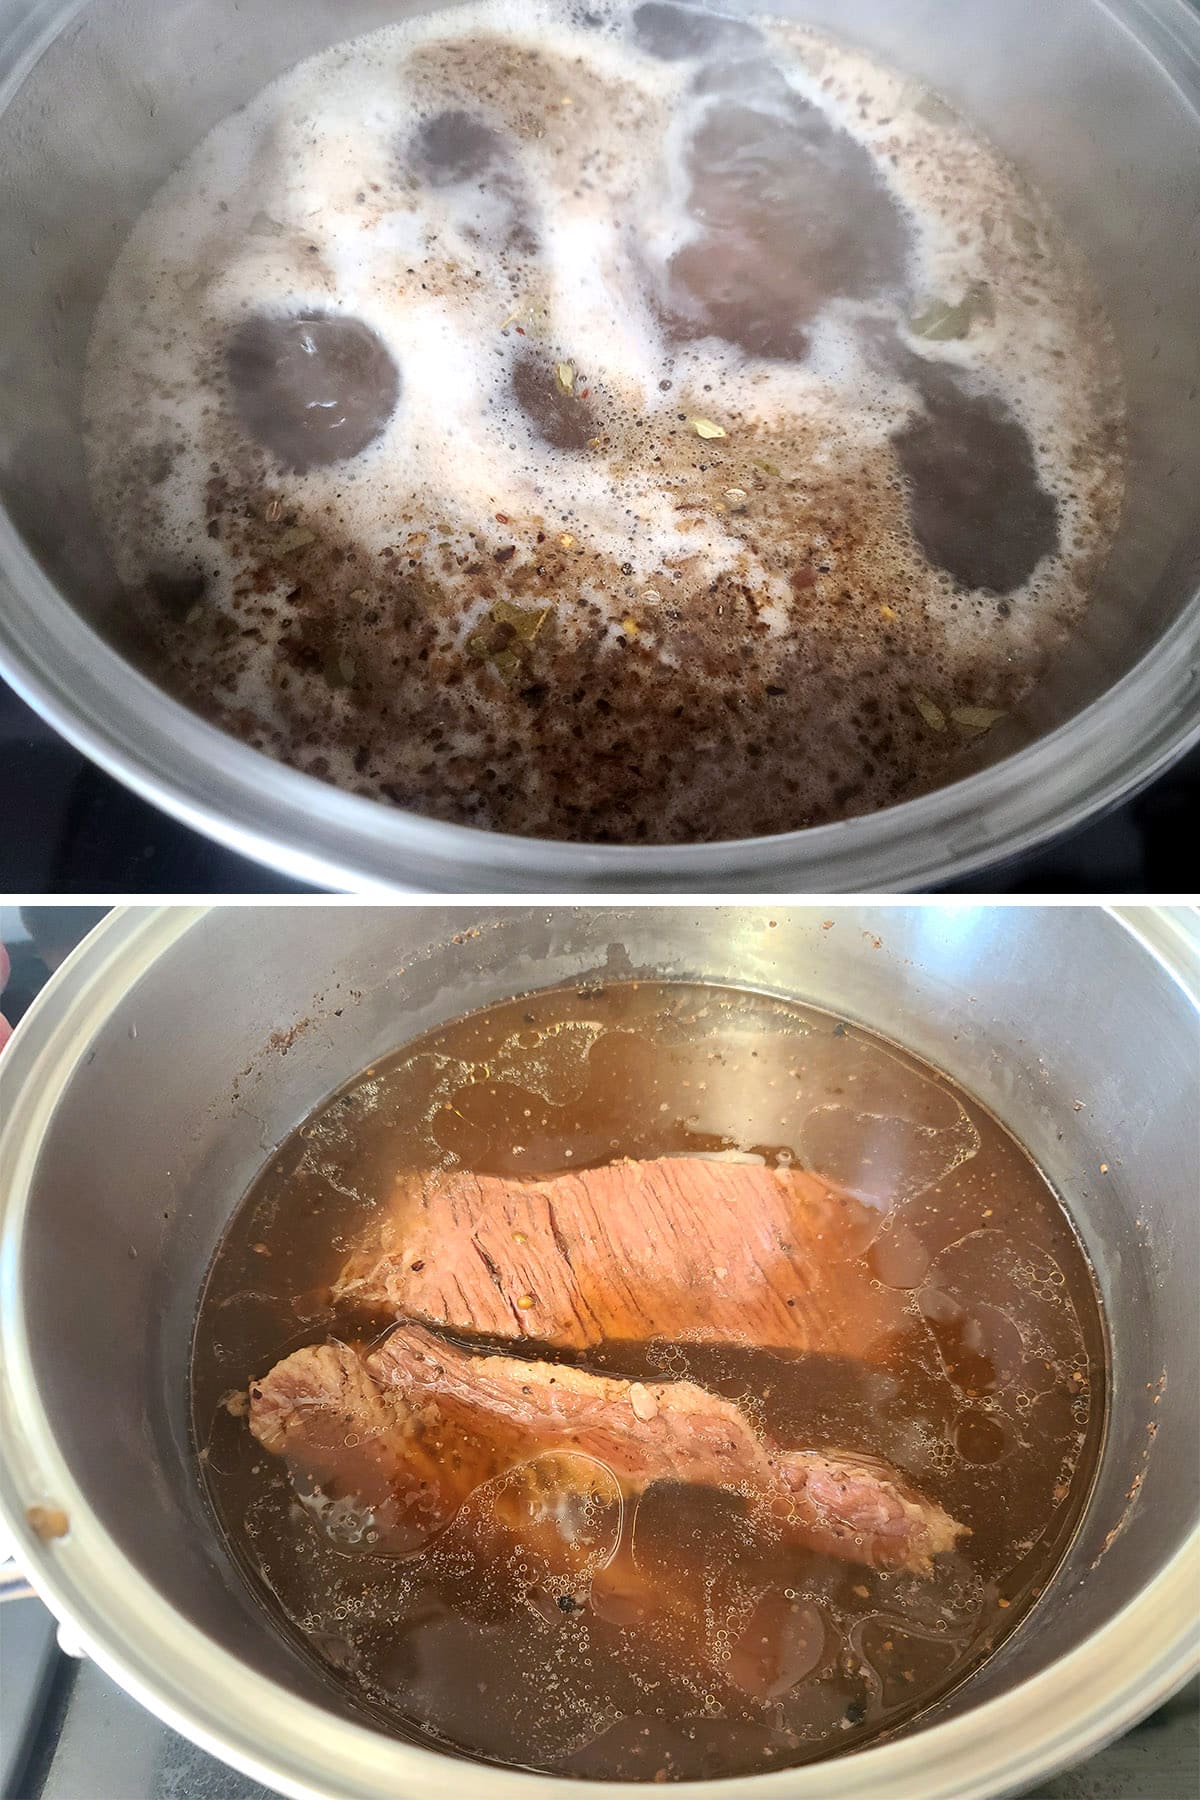 A 2 part image showing the brisket being boiled in a large pot.